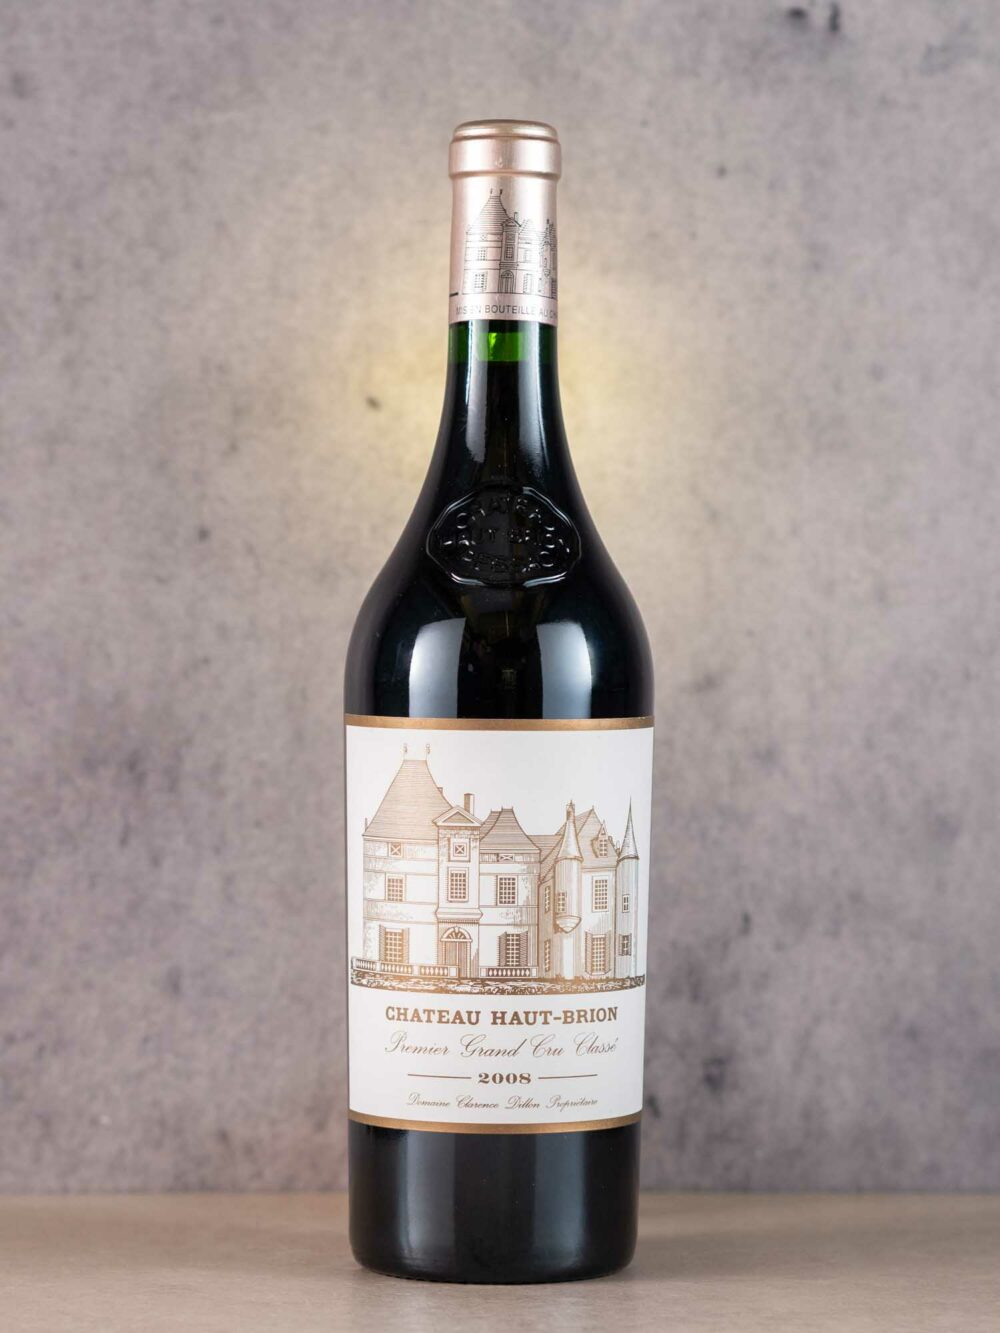 May Wines – Rotwein – 2008 Château Haut-Brion